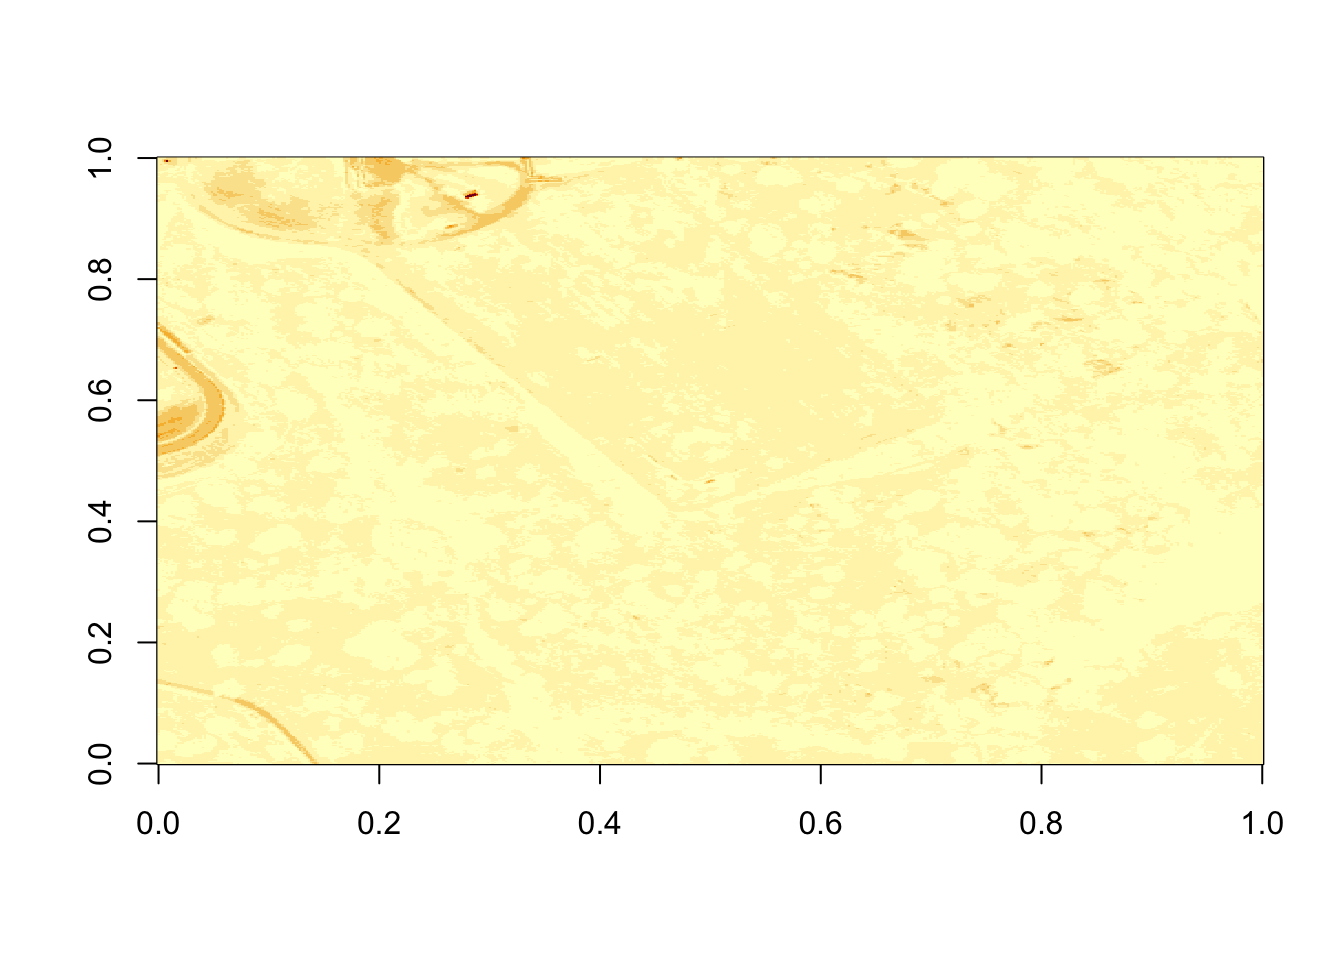 Plot of reflectance values for band 9 data. This plot shows a very washed out image lacking any detail.